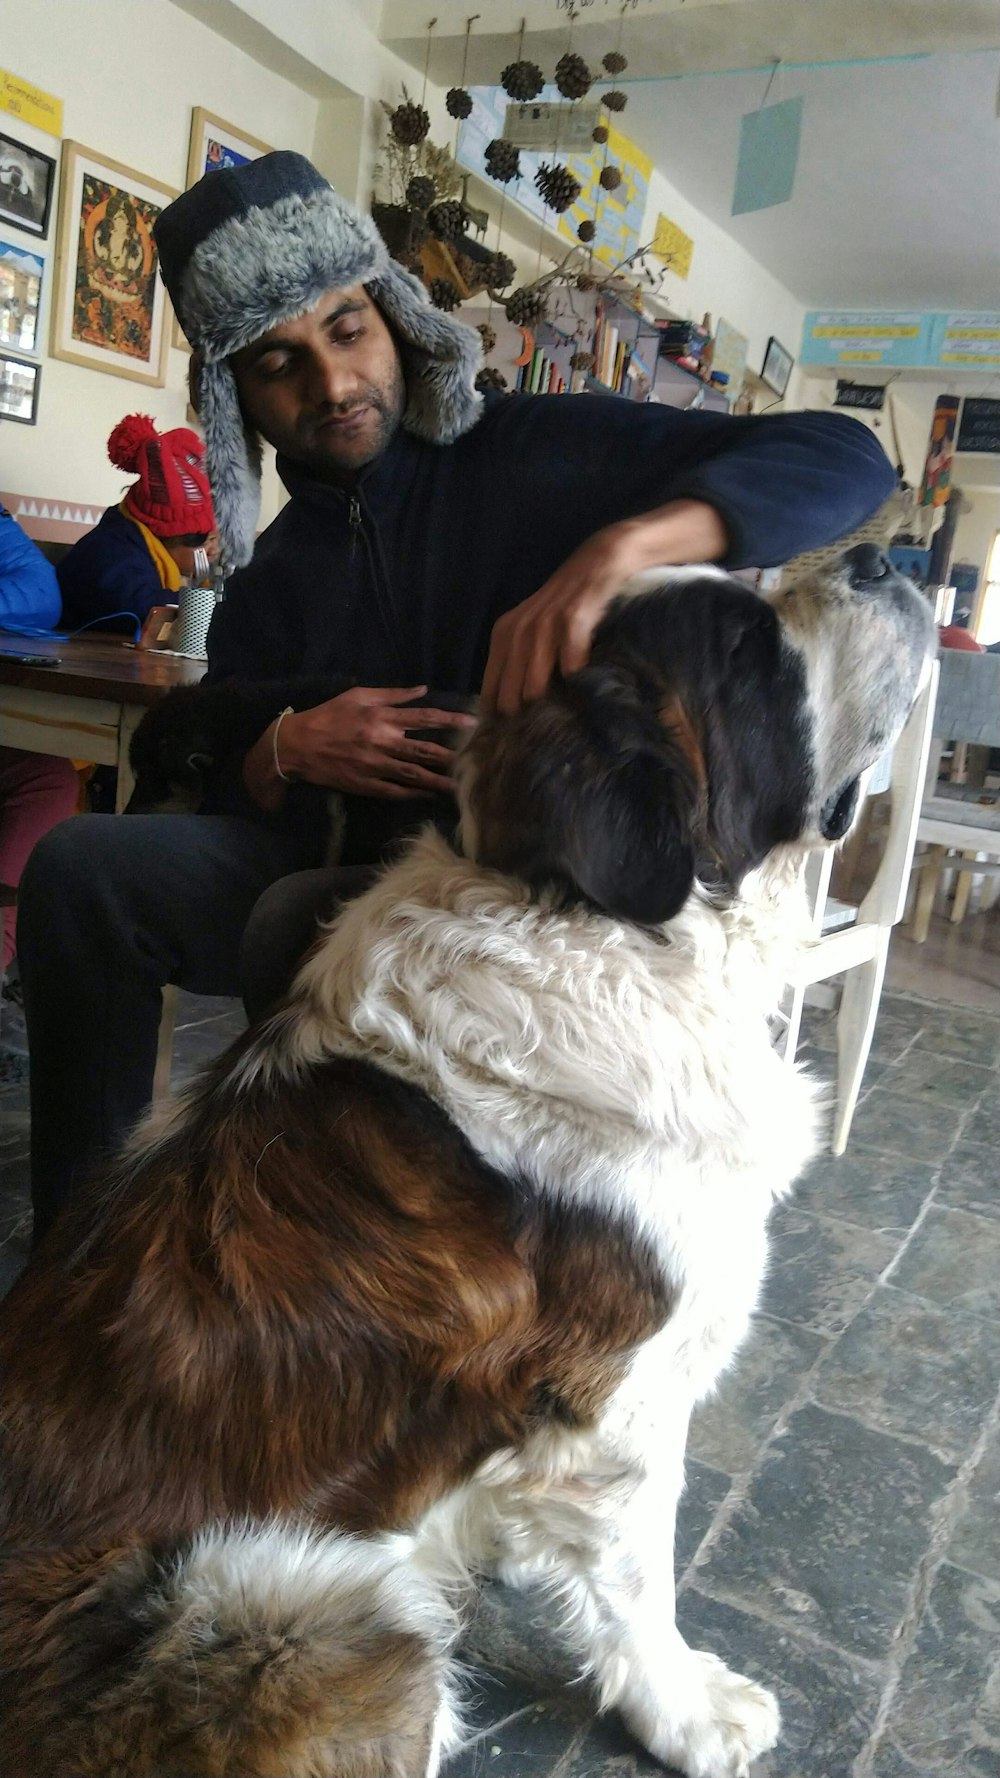 a man sitting in a chair petting a brown and white dog